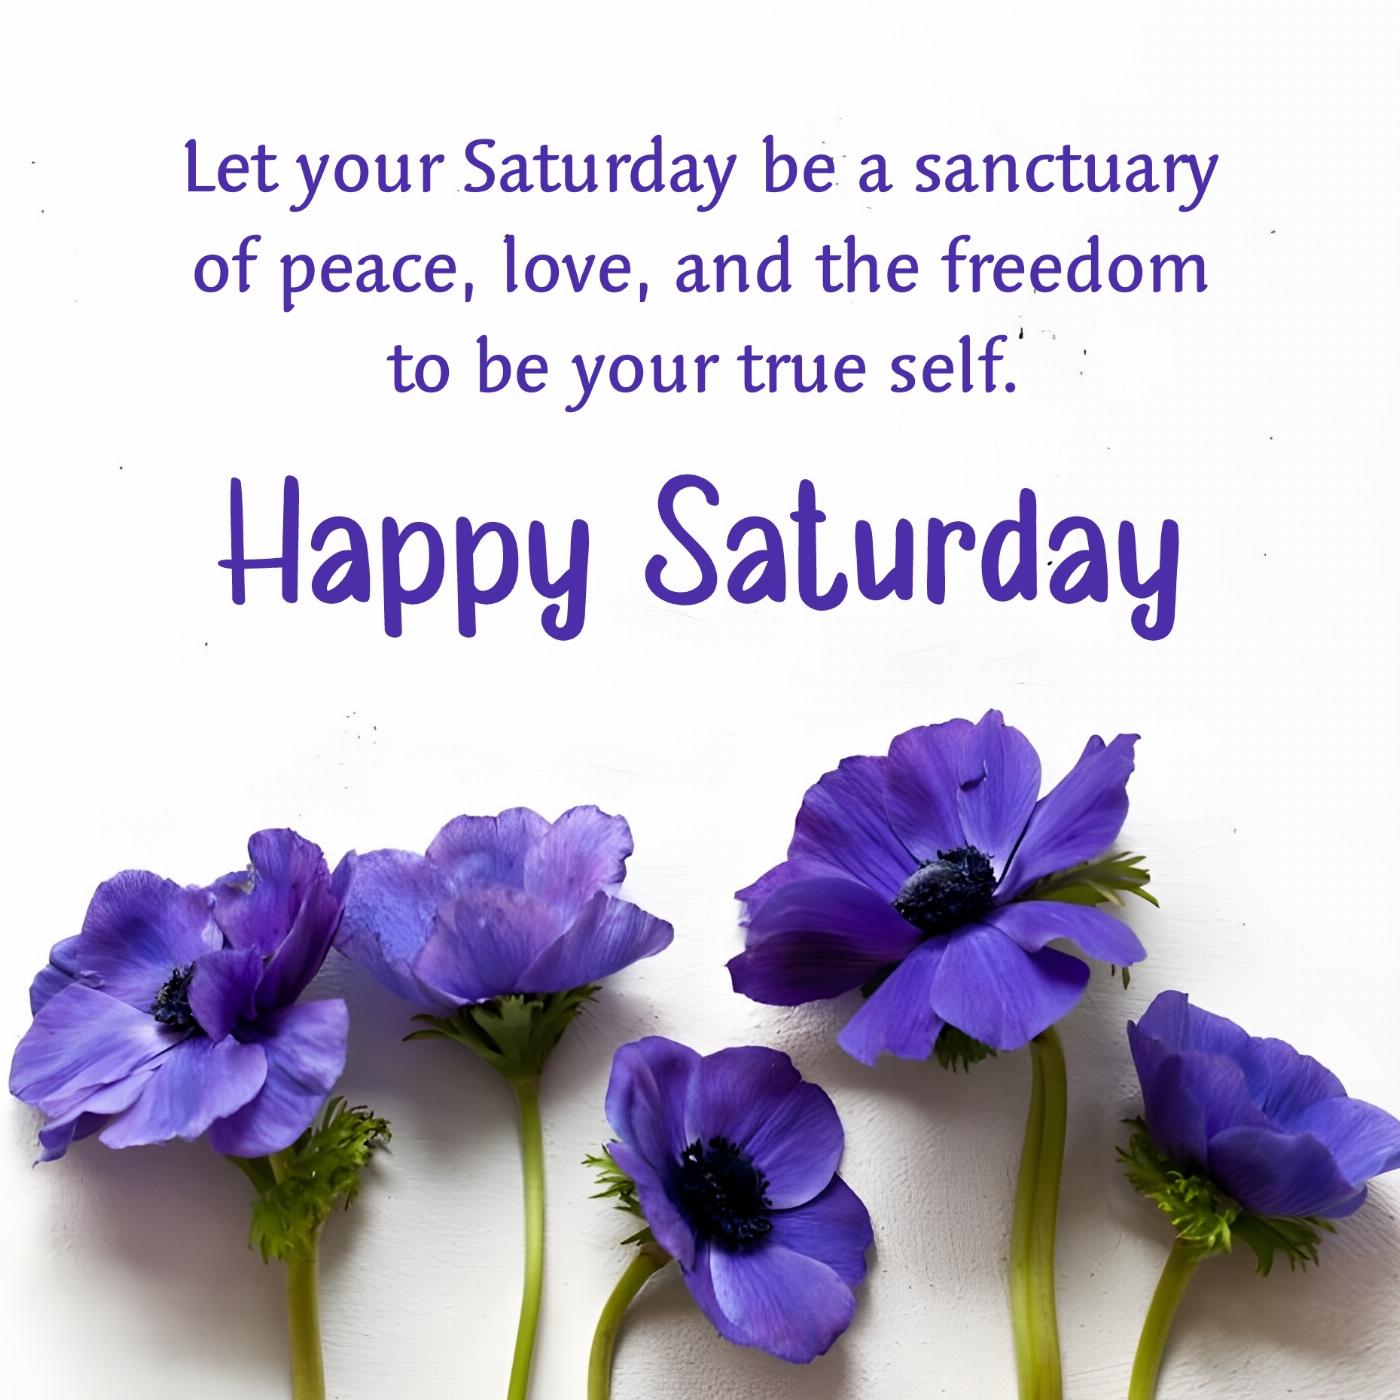 Let your Saturday be a sanctuary of peace love